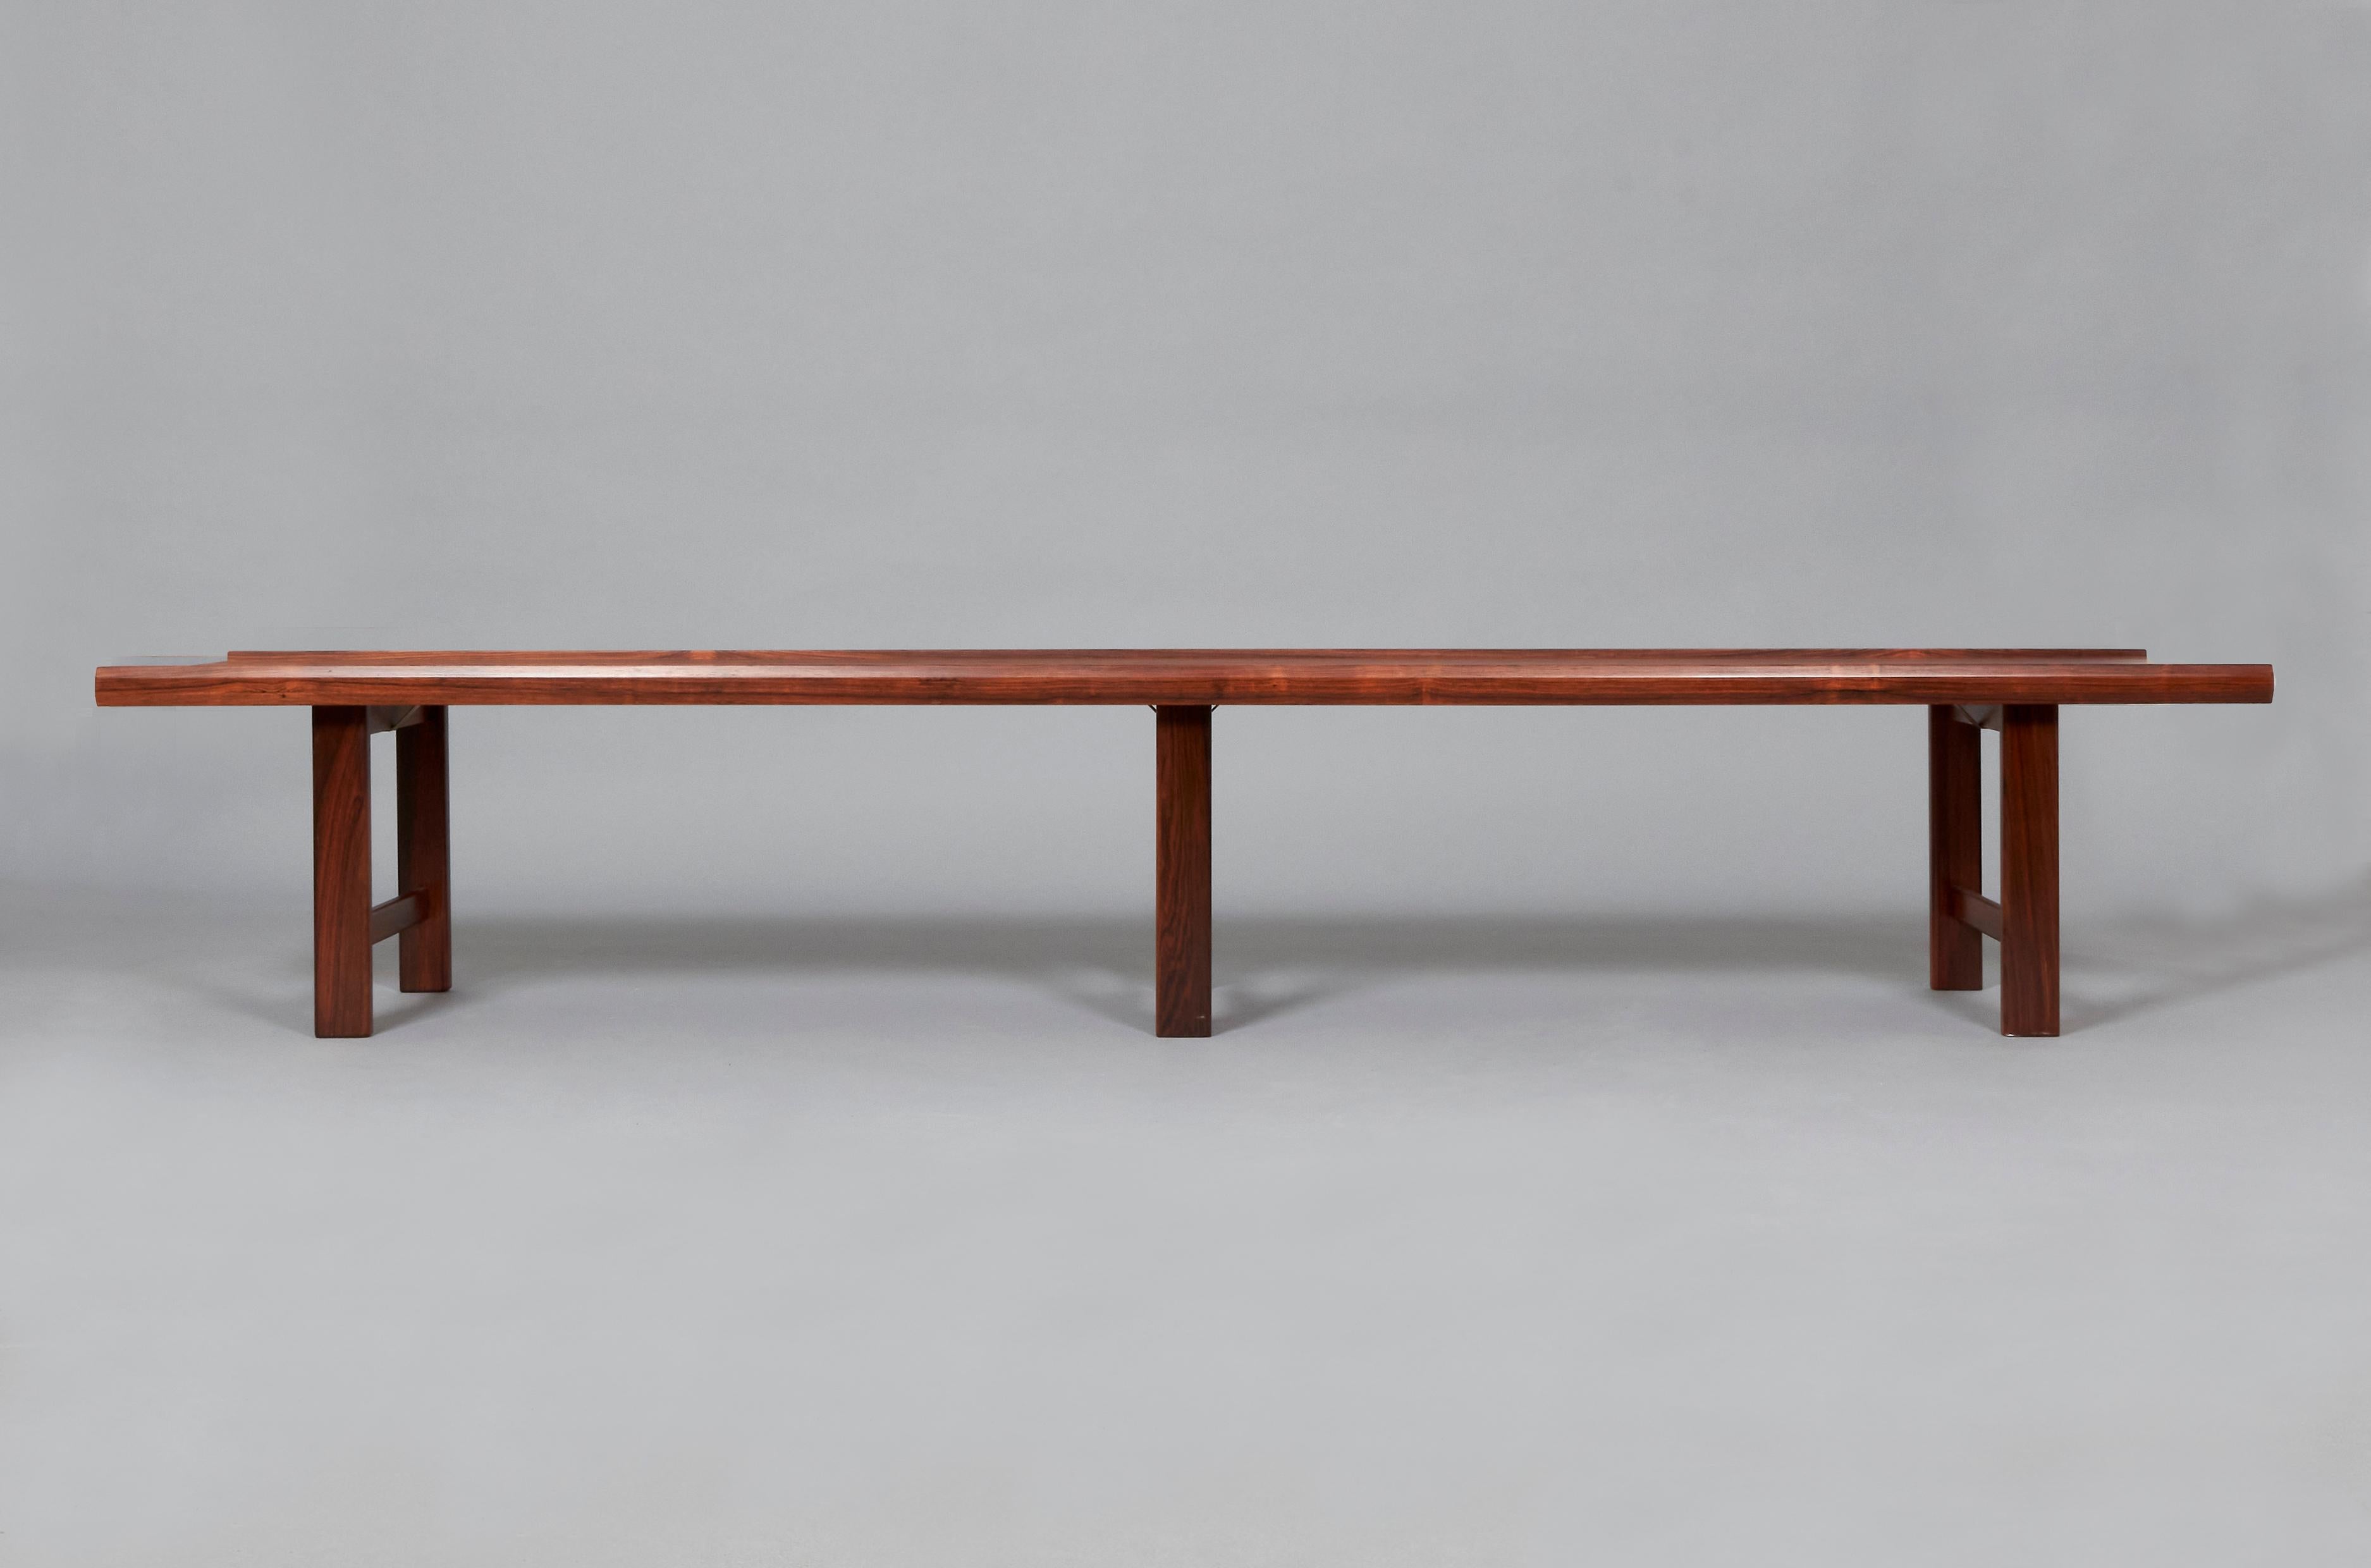 Rosewood bench by an anonymous designer manufactured in rosewood veneer. Norway, 1960s.
This design of clear and simple lines and proportions is a great example of modernist Norwegian design. Its vintage condition is excellent, with original patina